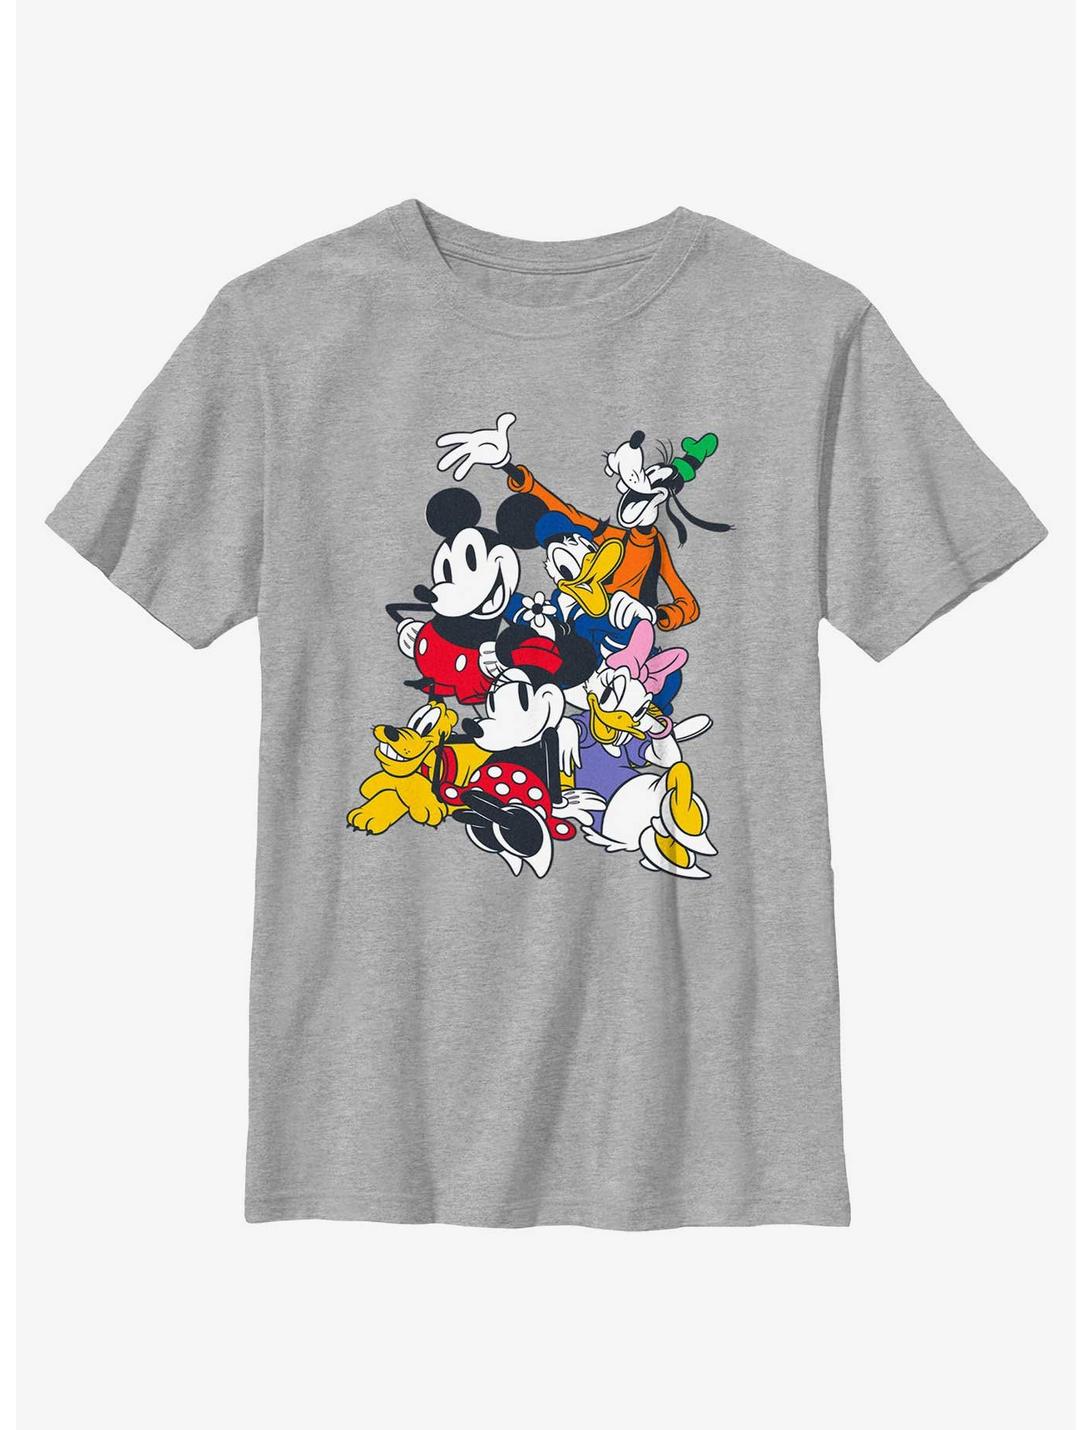 Disney Mickey Mouse & Friend Group Hanging Out Youth T-Shirt, ATH HTR, hi-res